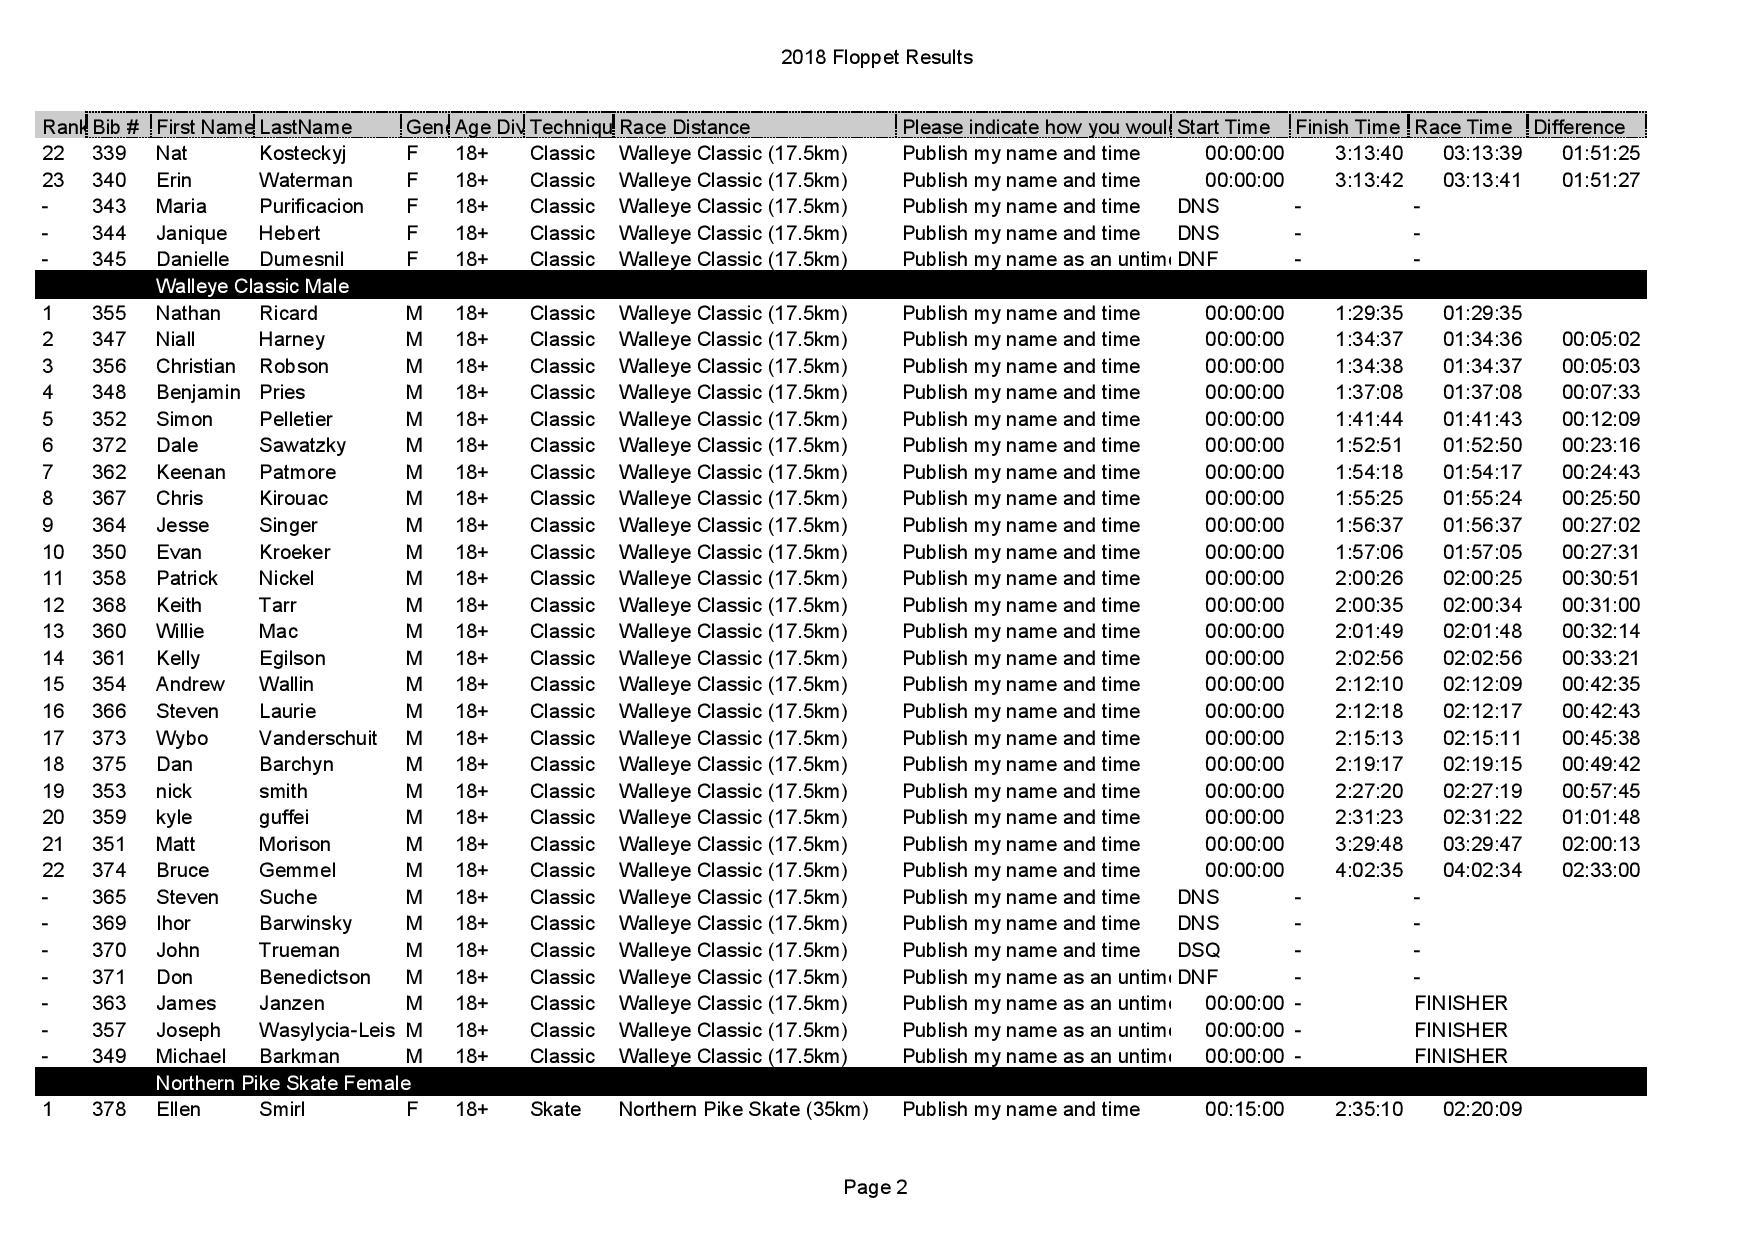 2018 Final Results - 2018 Floppet Results(1)-page-002.jpg